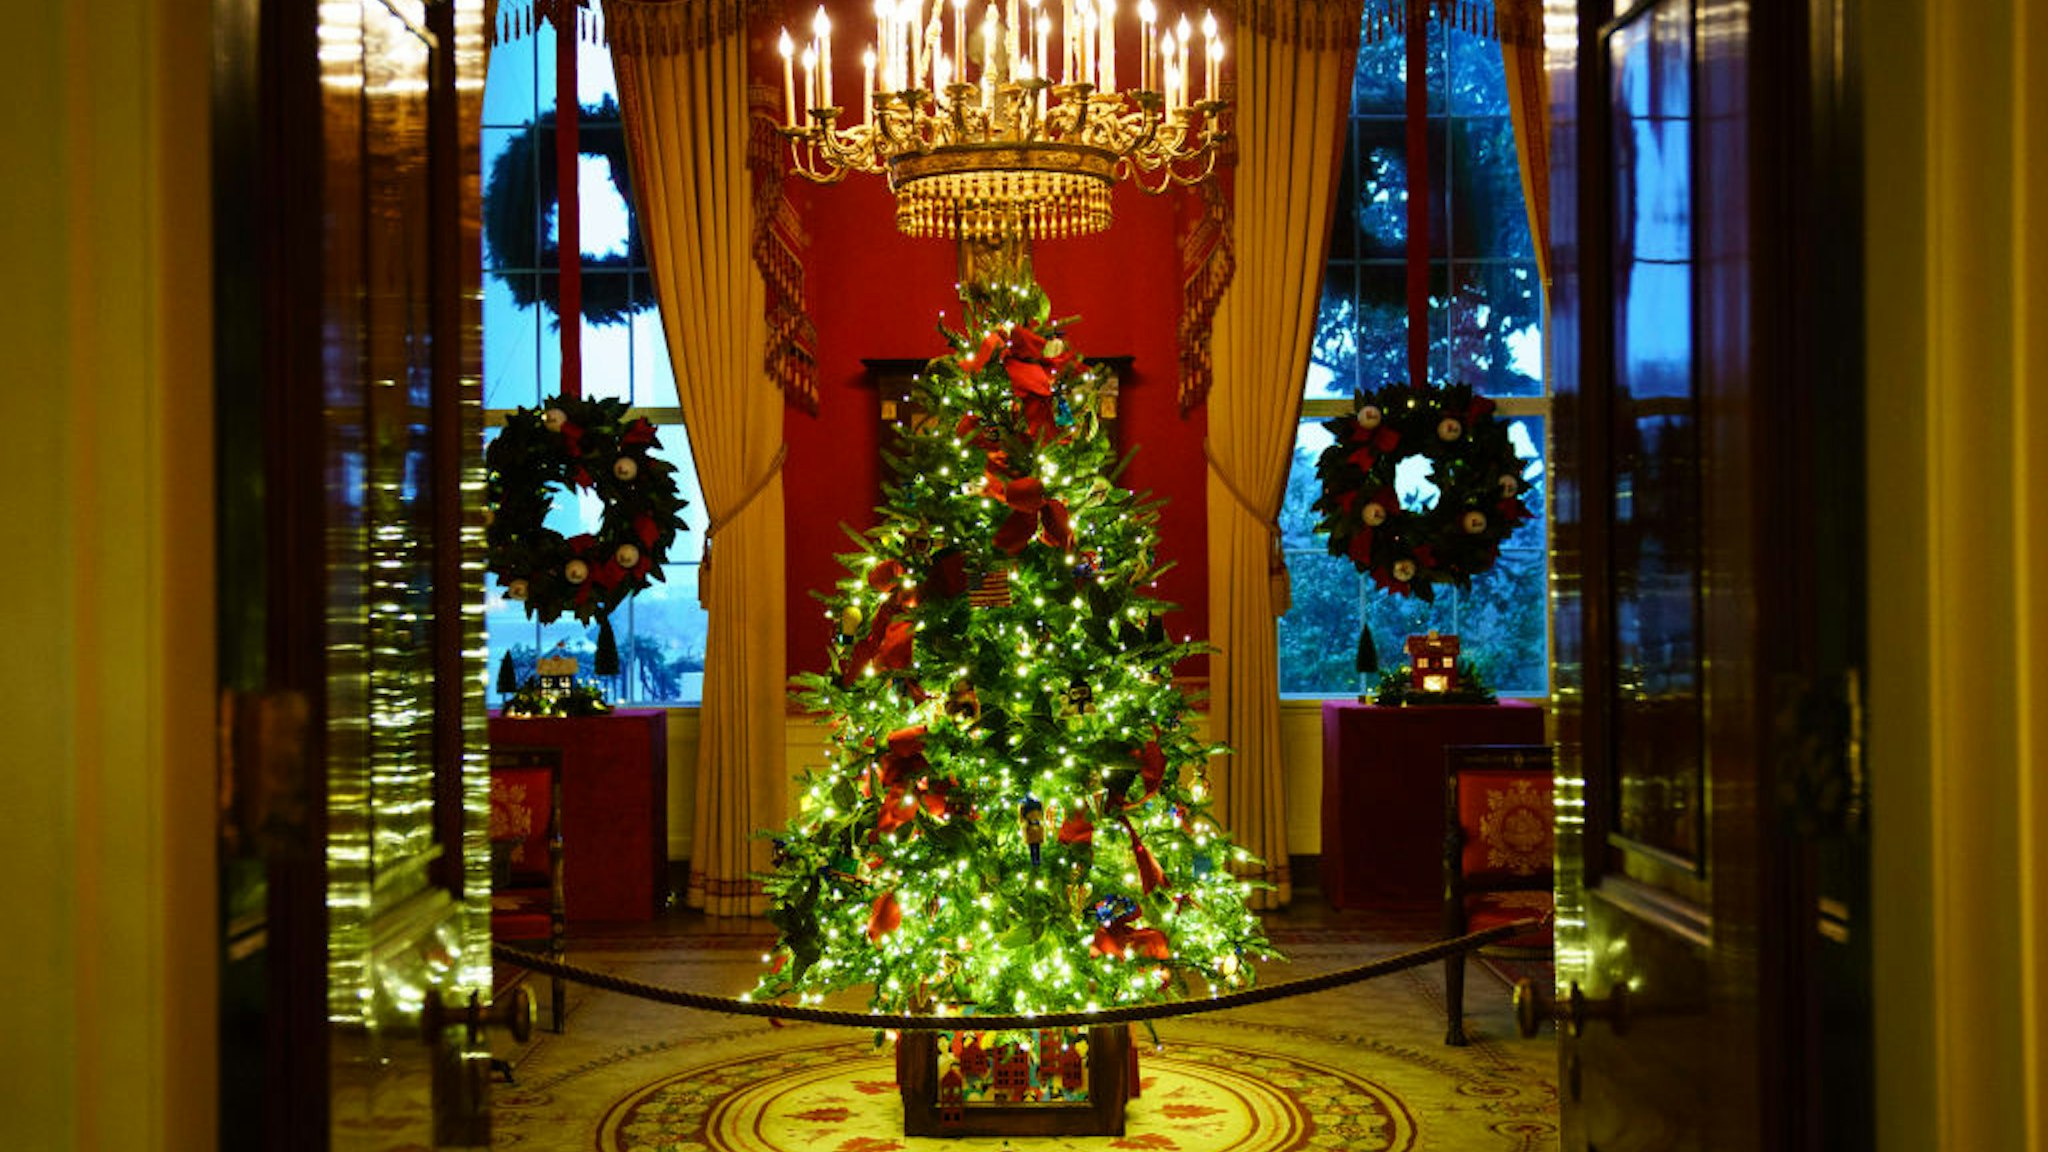 White House Holds Press Preview For Its Christmas Décor